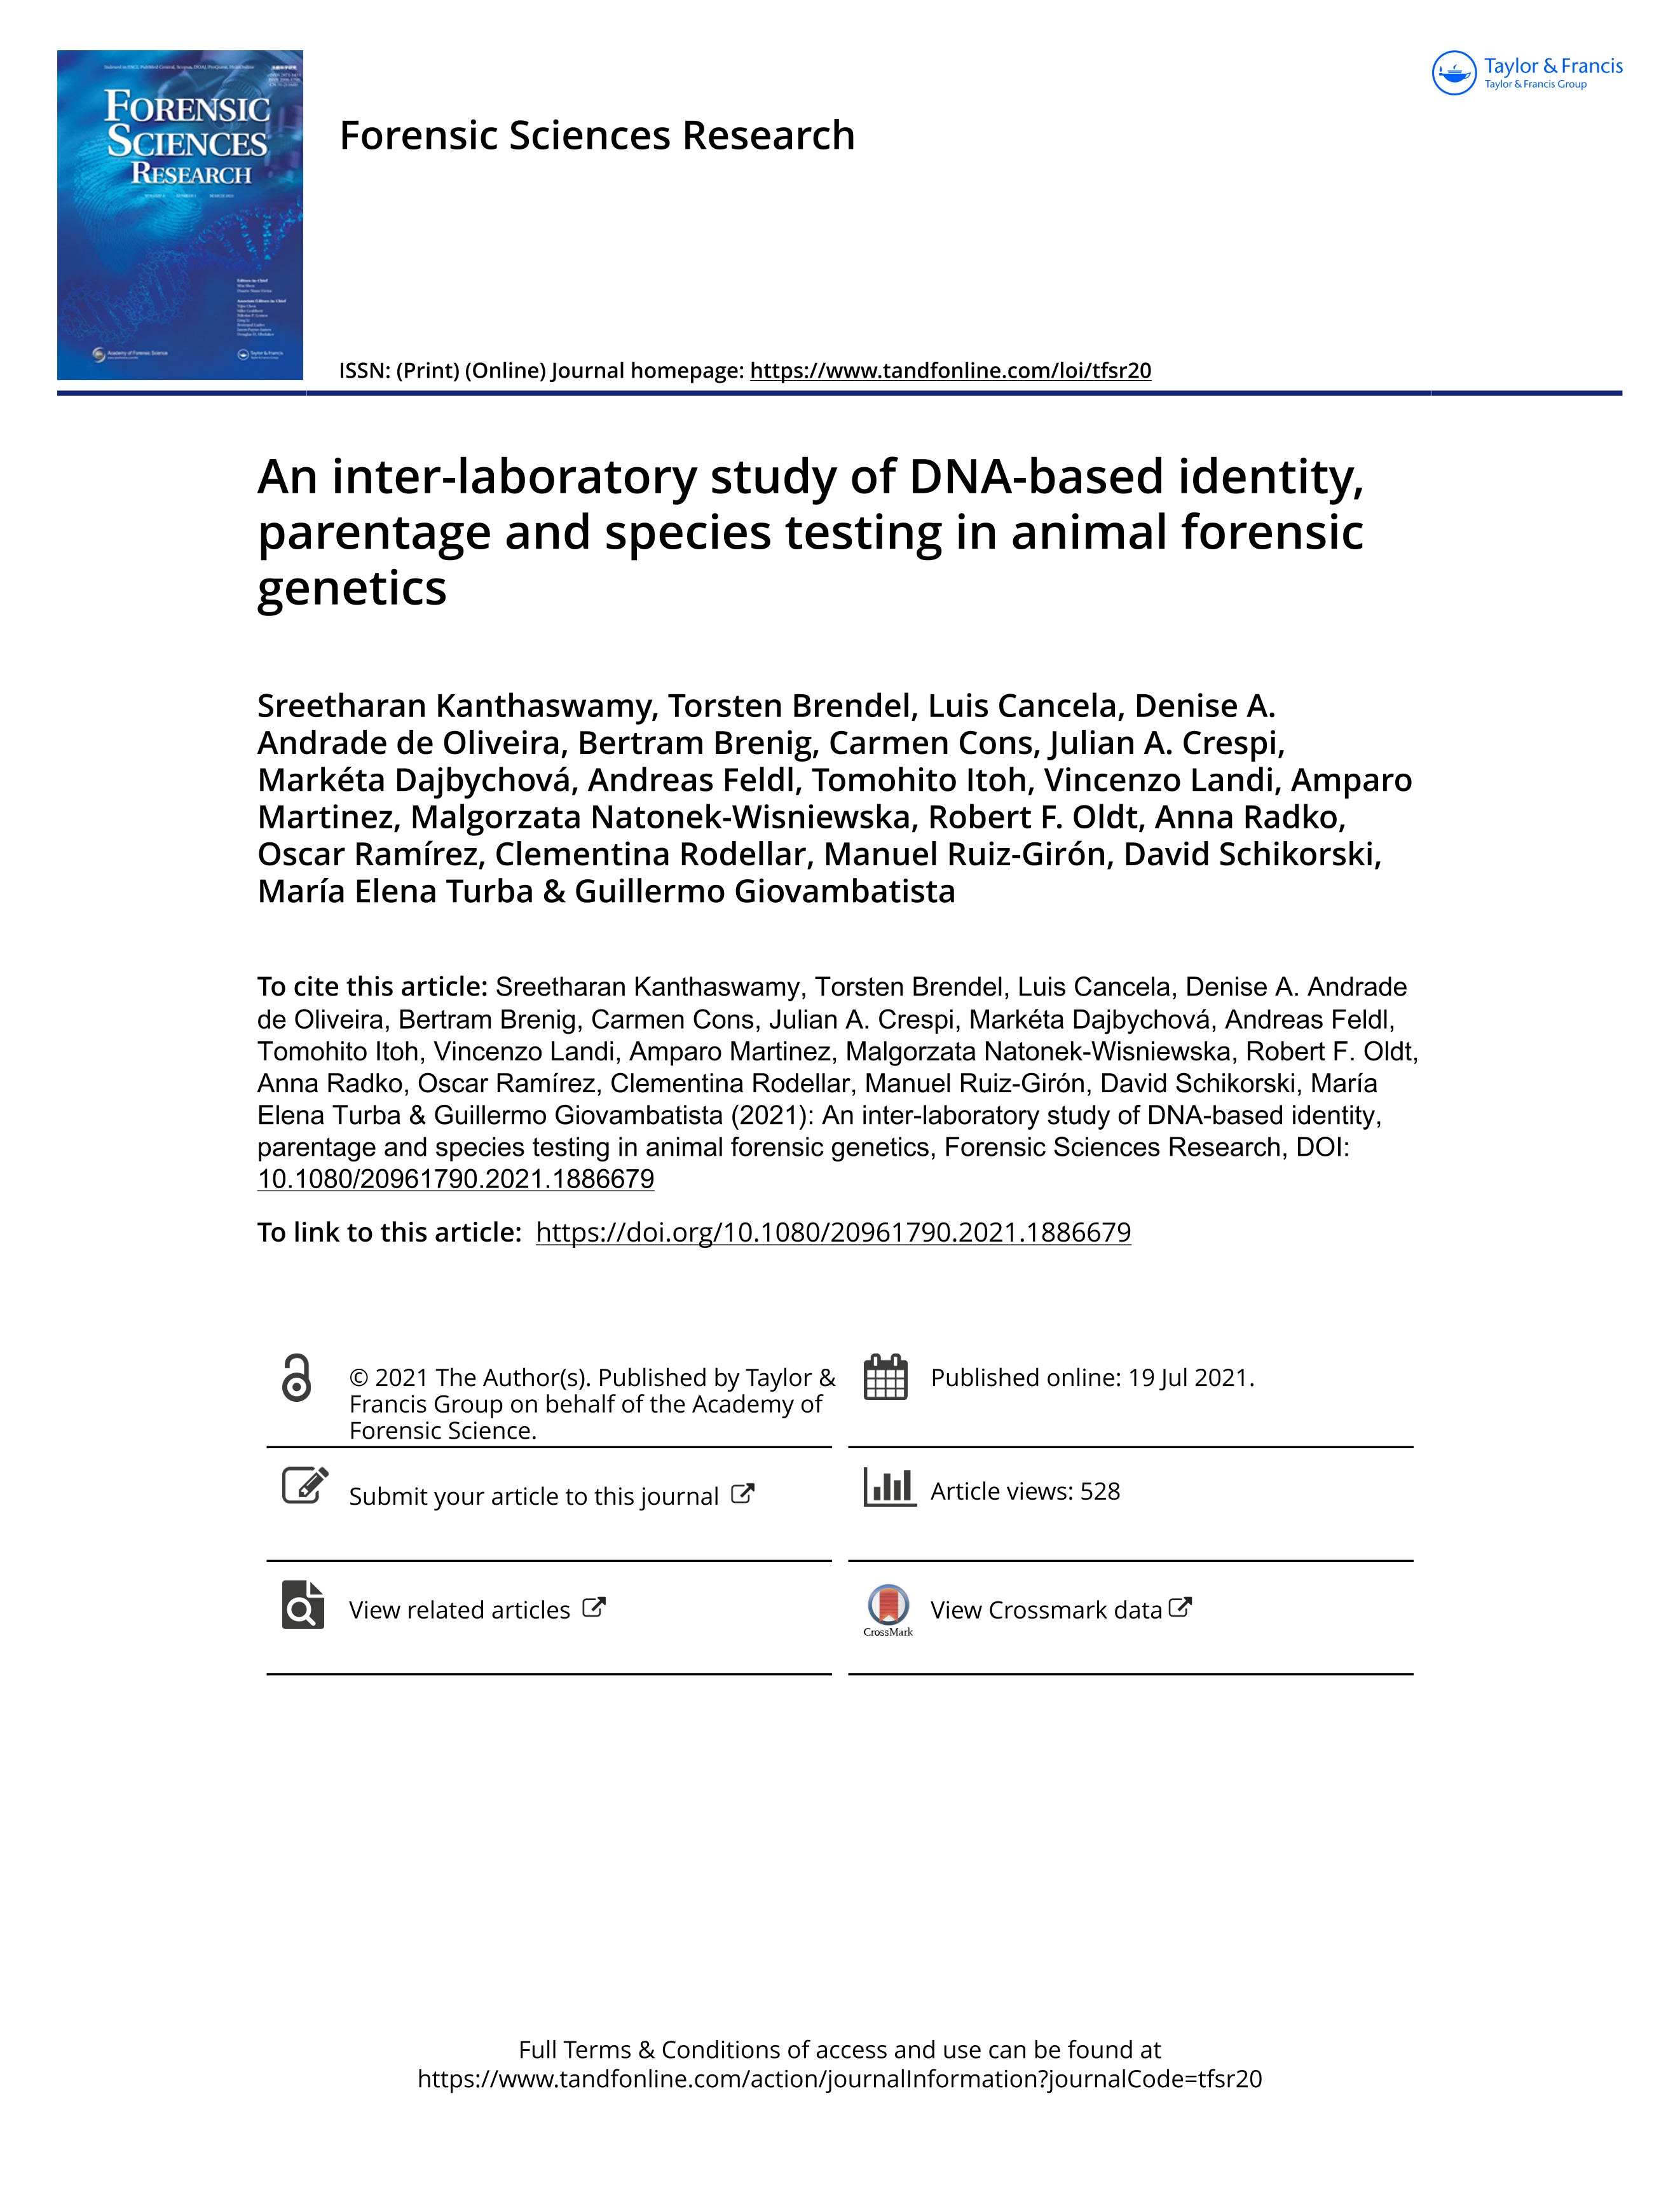 An inter-laboratory study of DNA-based identity, parentage and species testing in animal forensic genetics